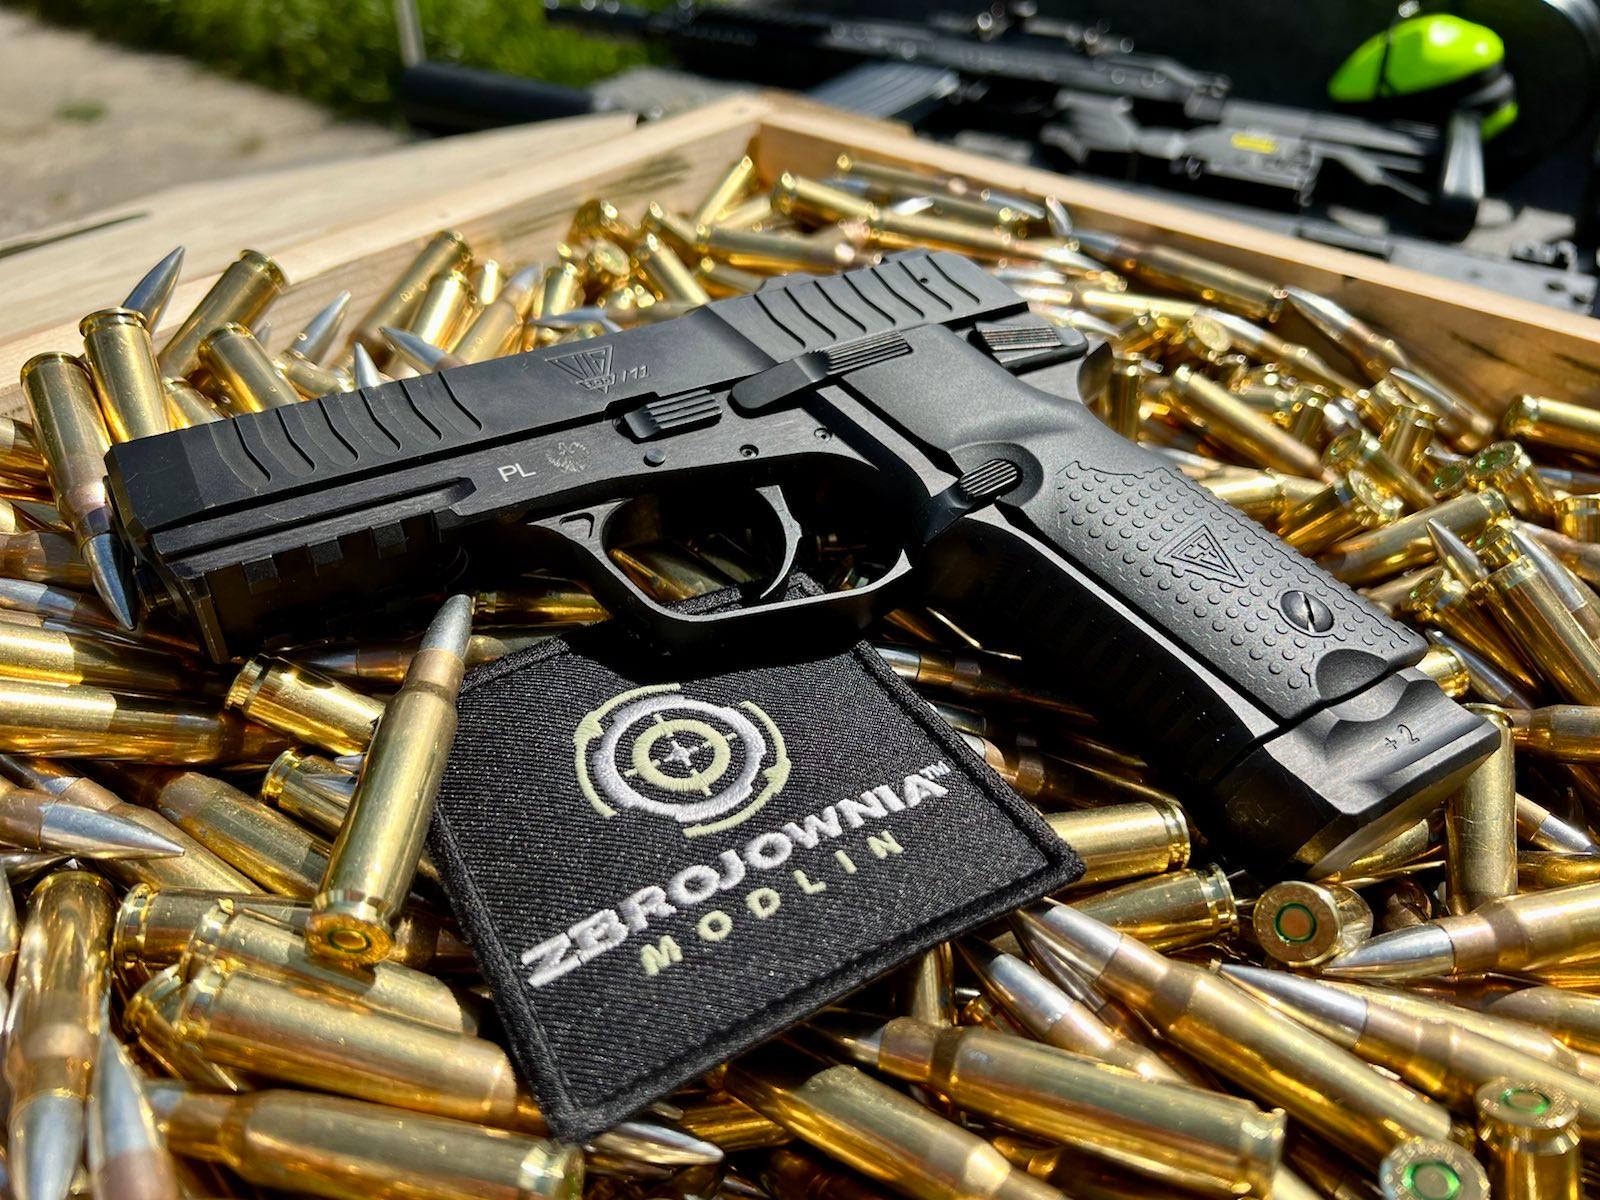 Four Ground Rules of Shooting Range Safety